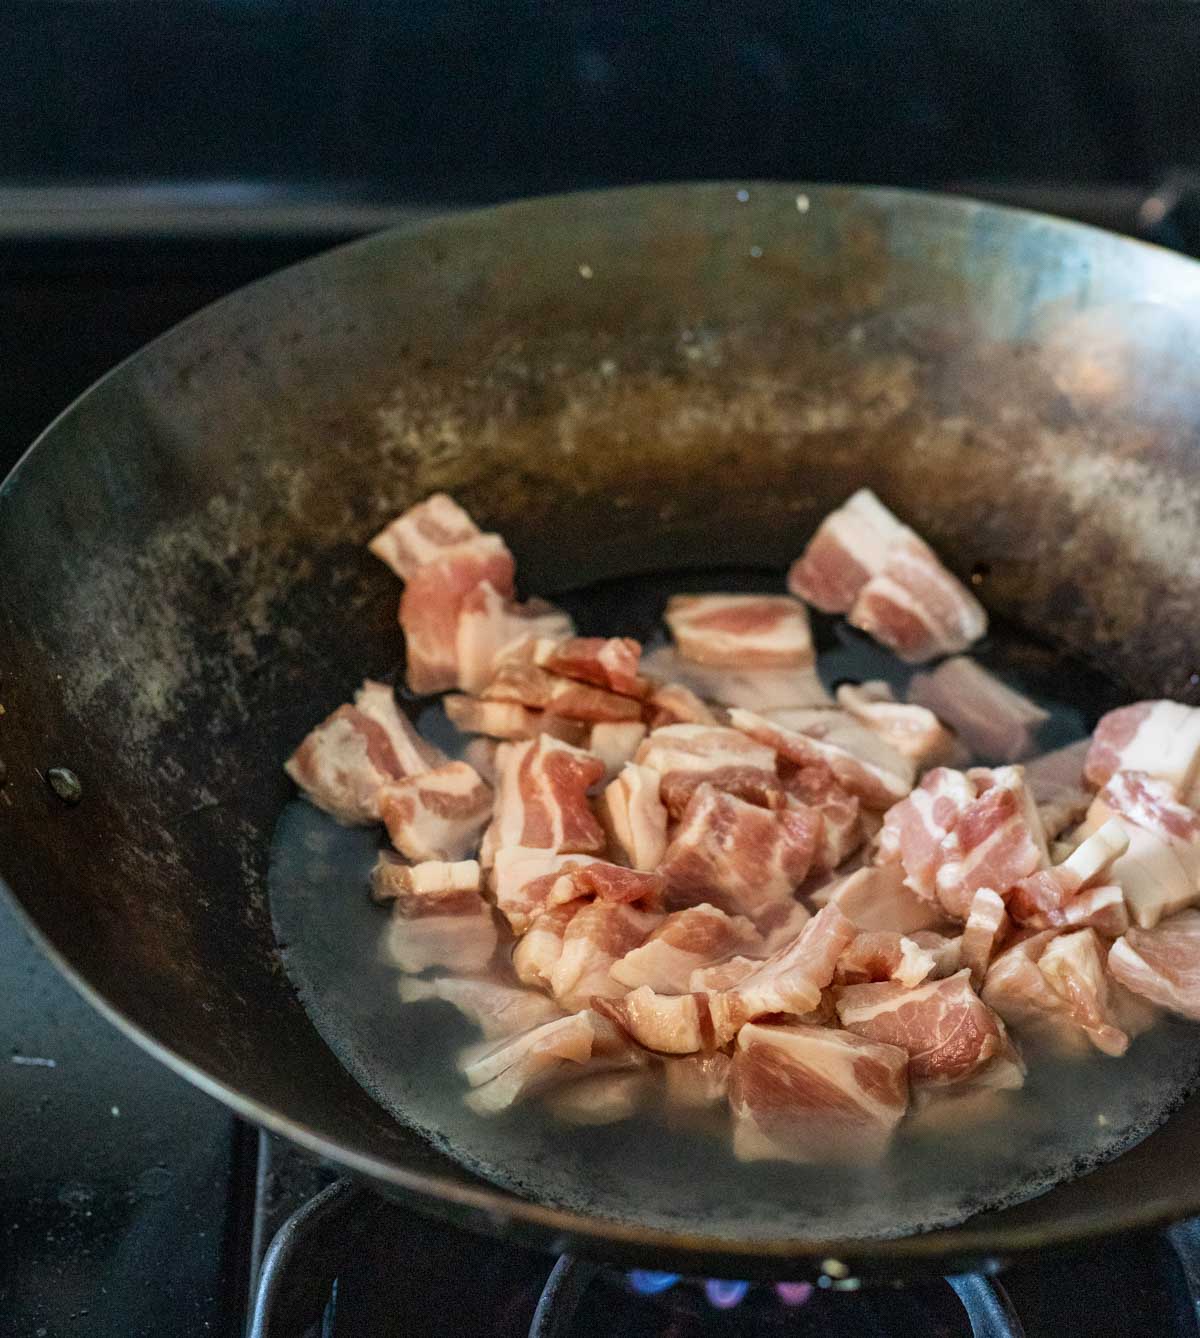 Pork belly pieces in liquid in a wok on the stovetop.